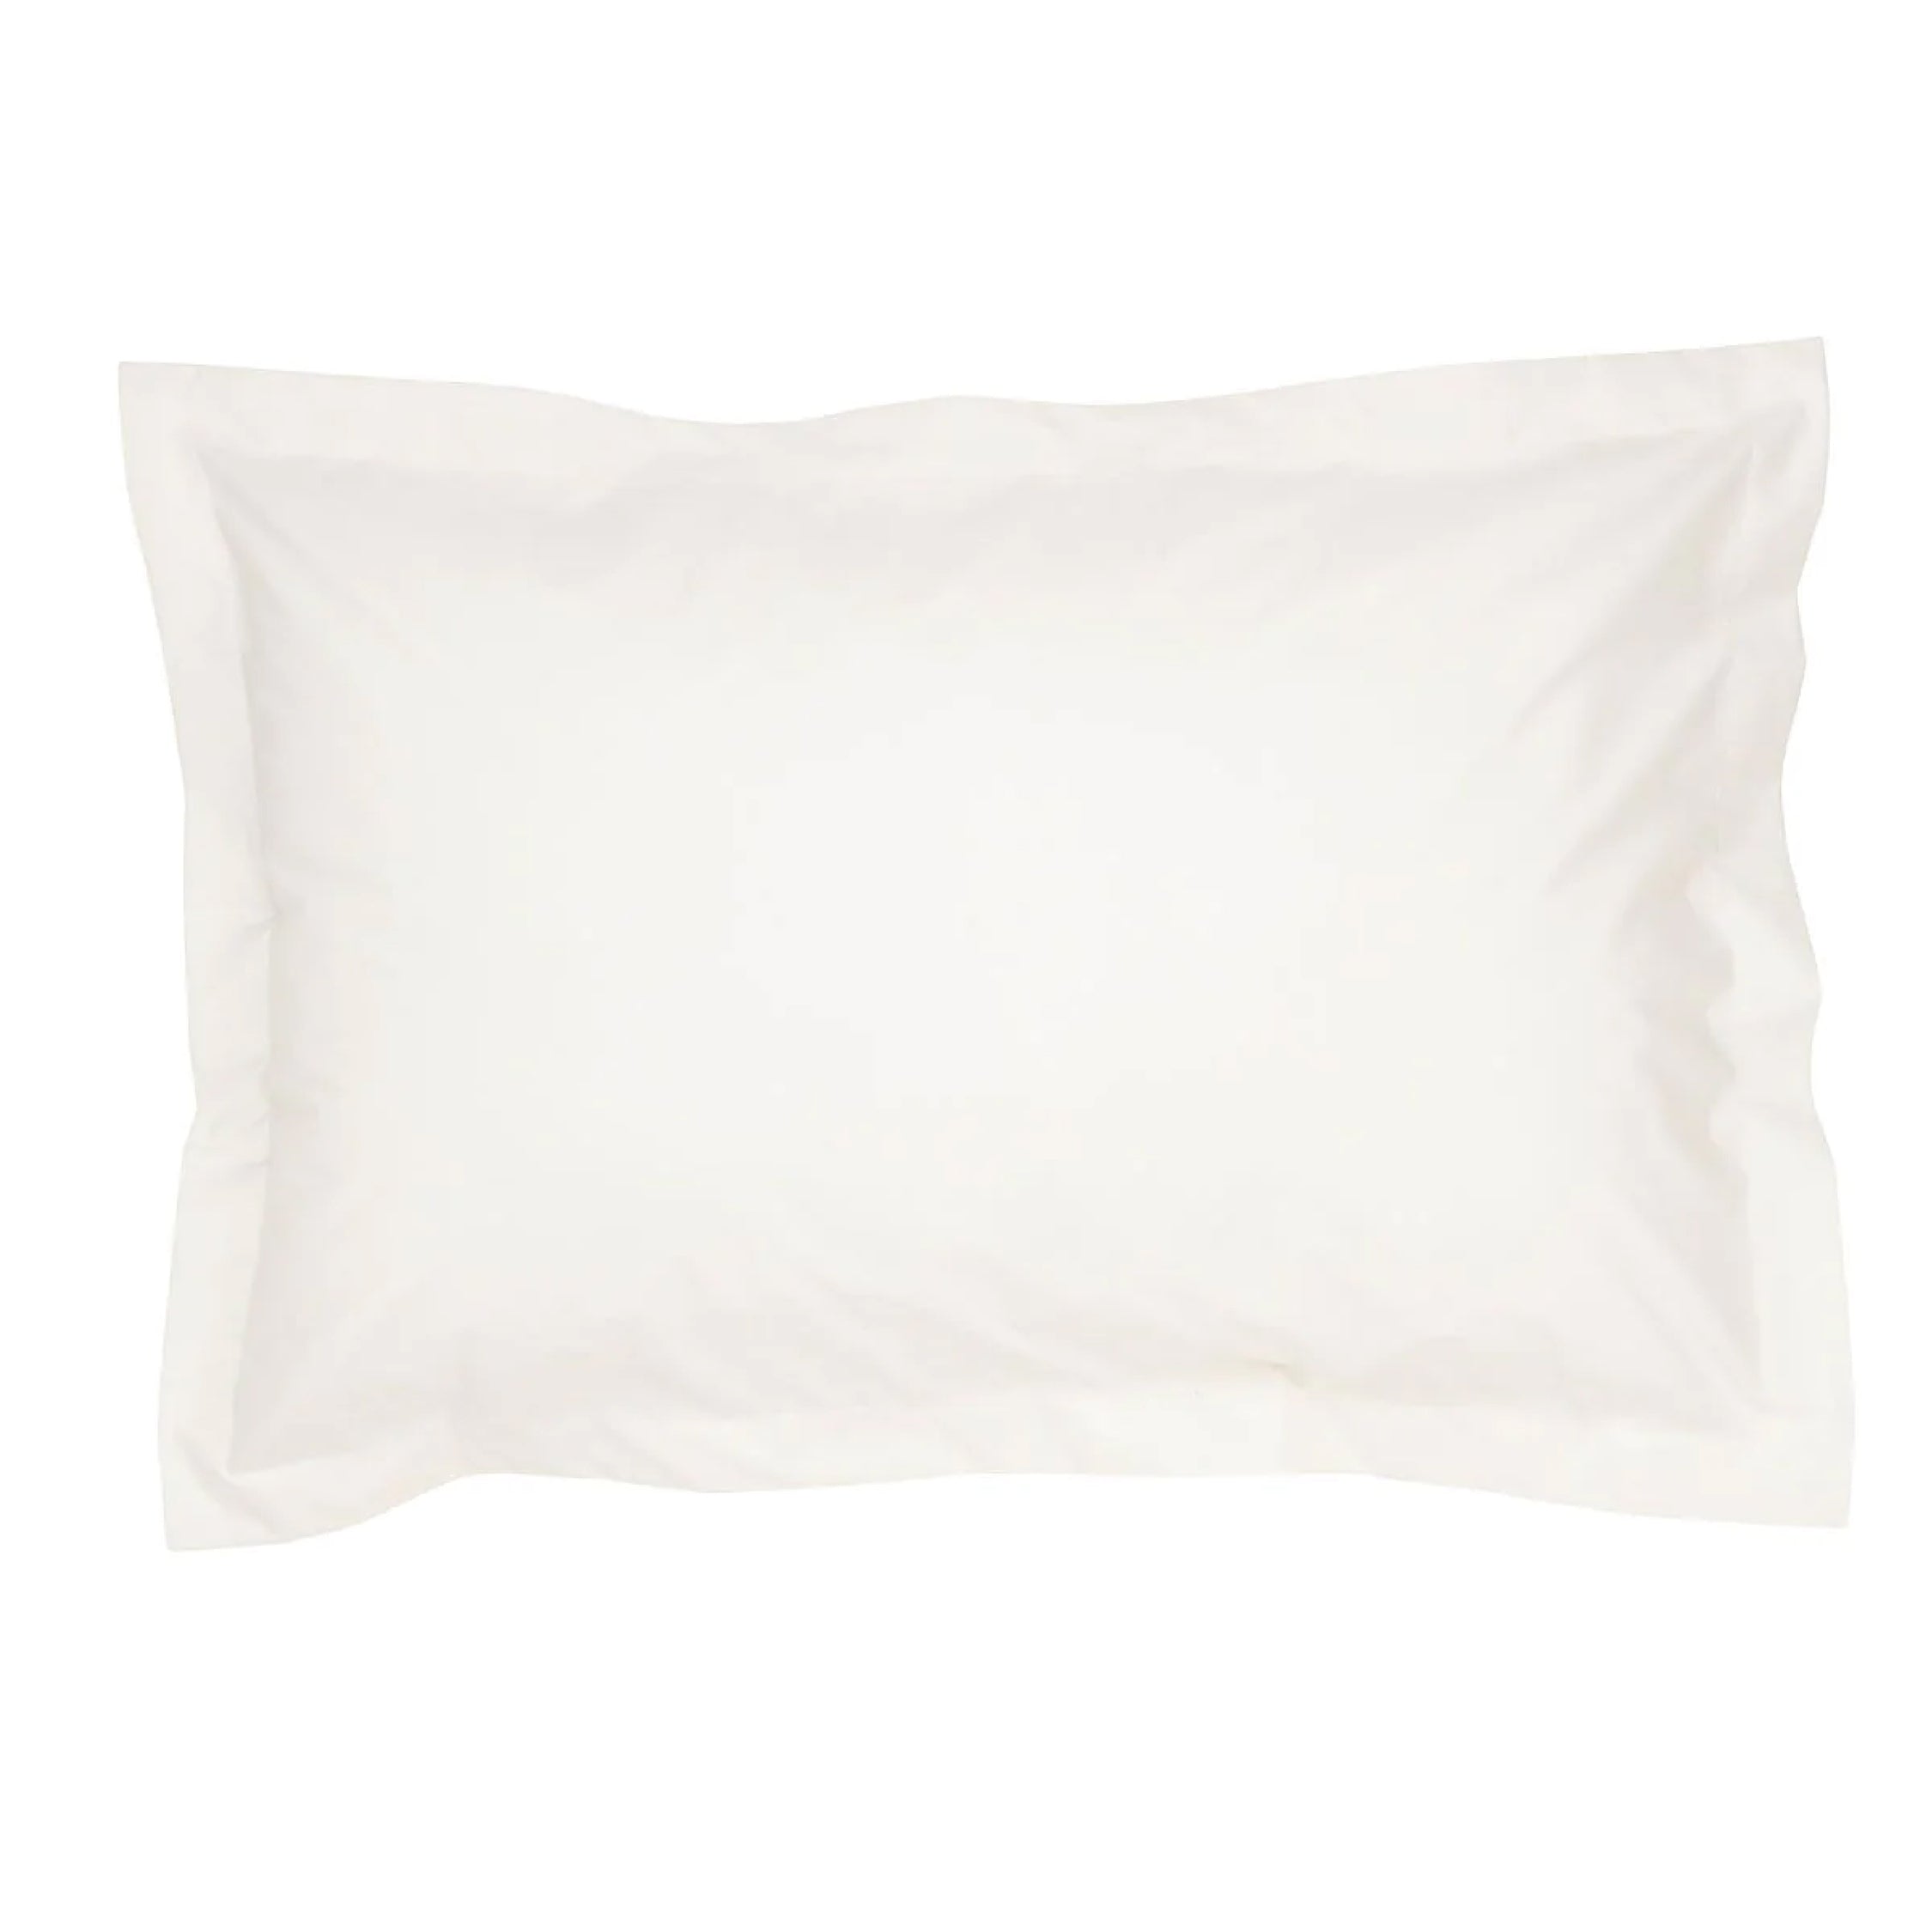 H&B Egyptian Cotton Sateen 2 Oxford Pillow Case Home and beyond